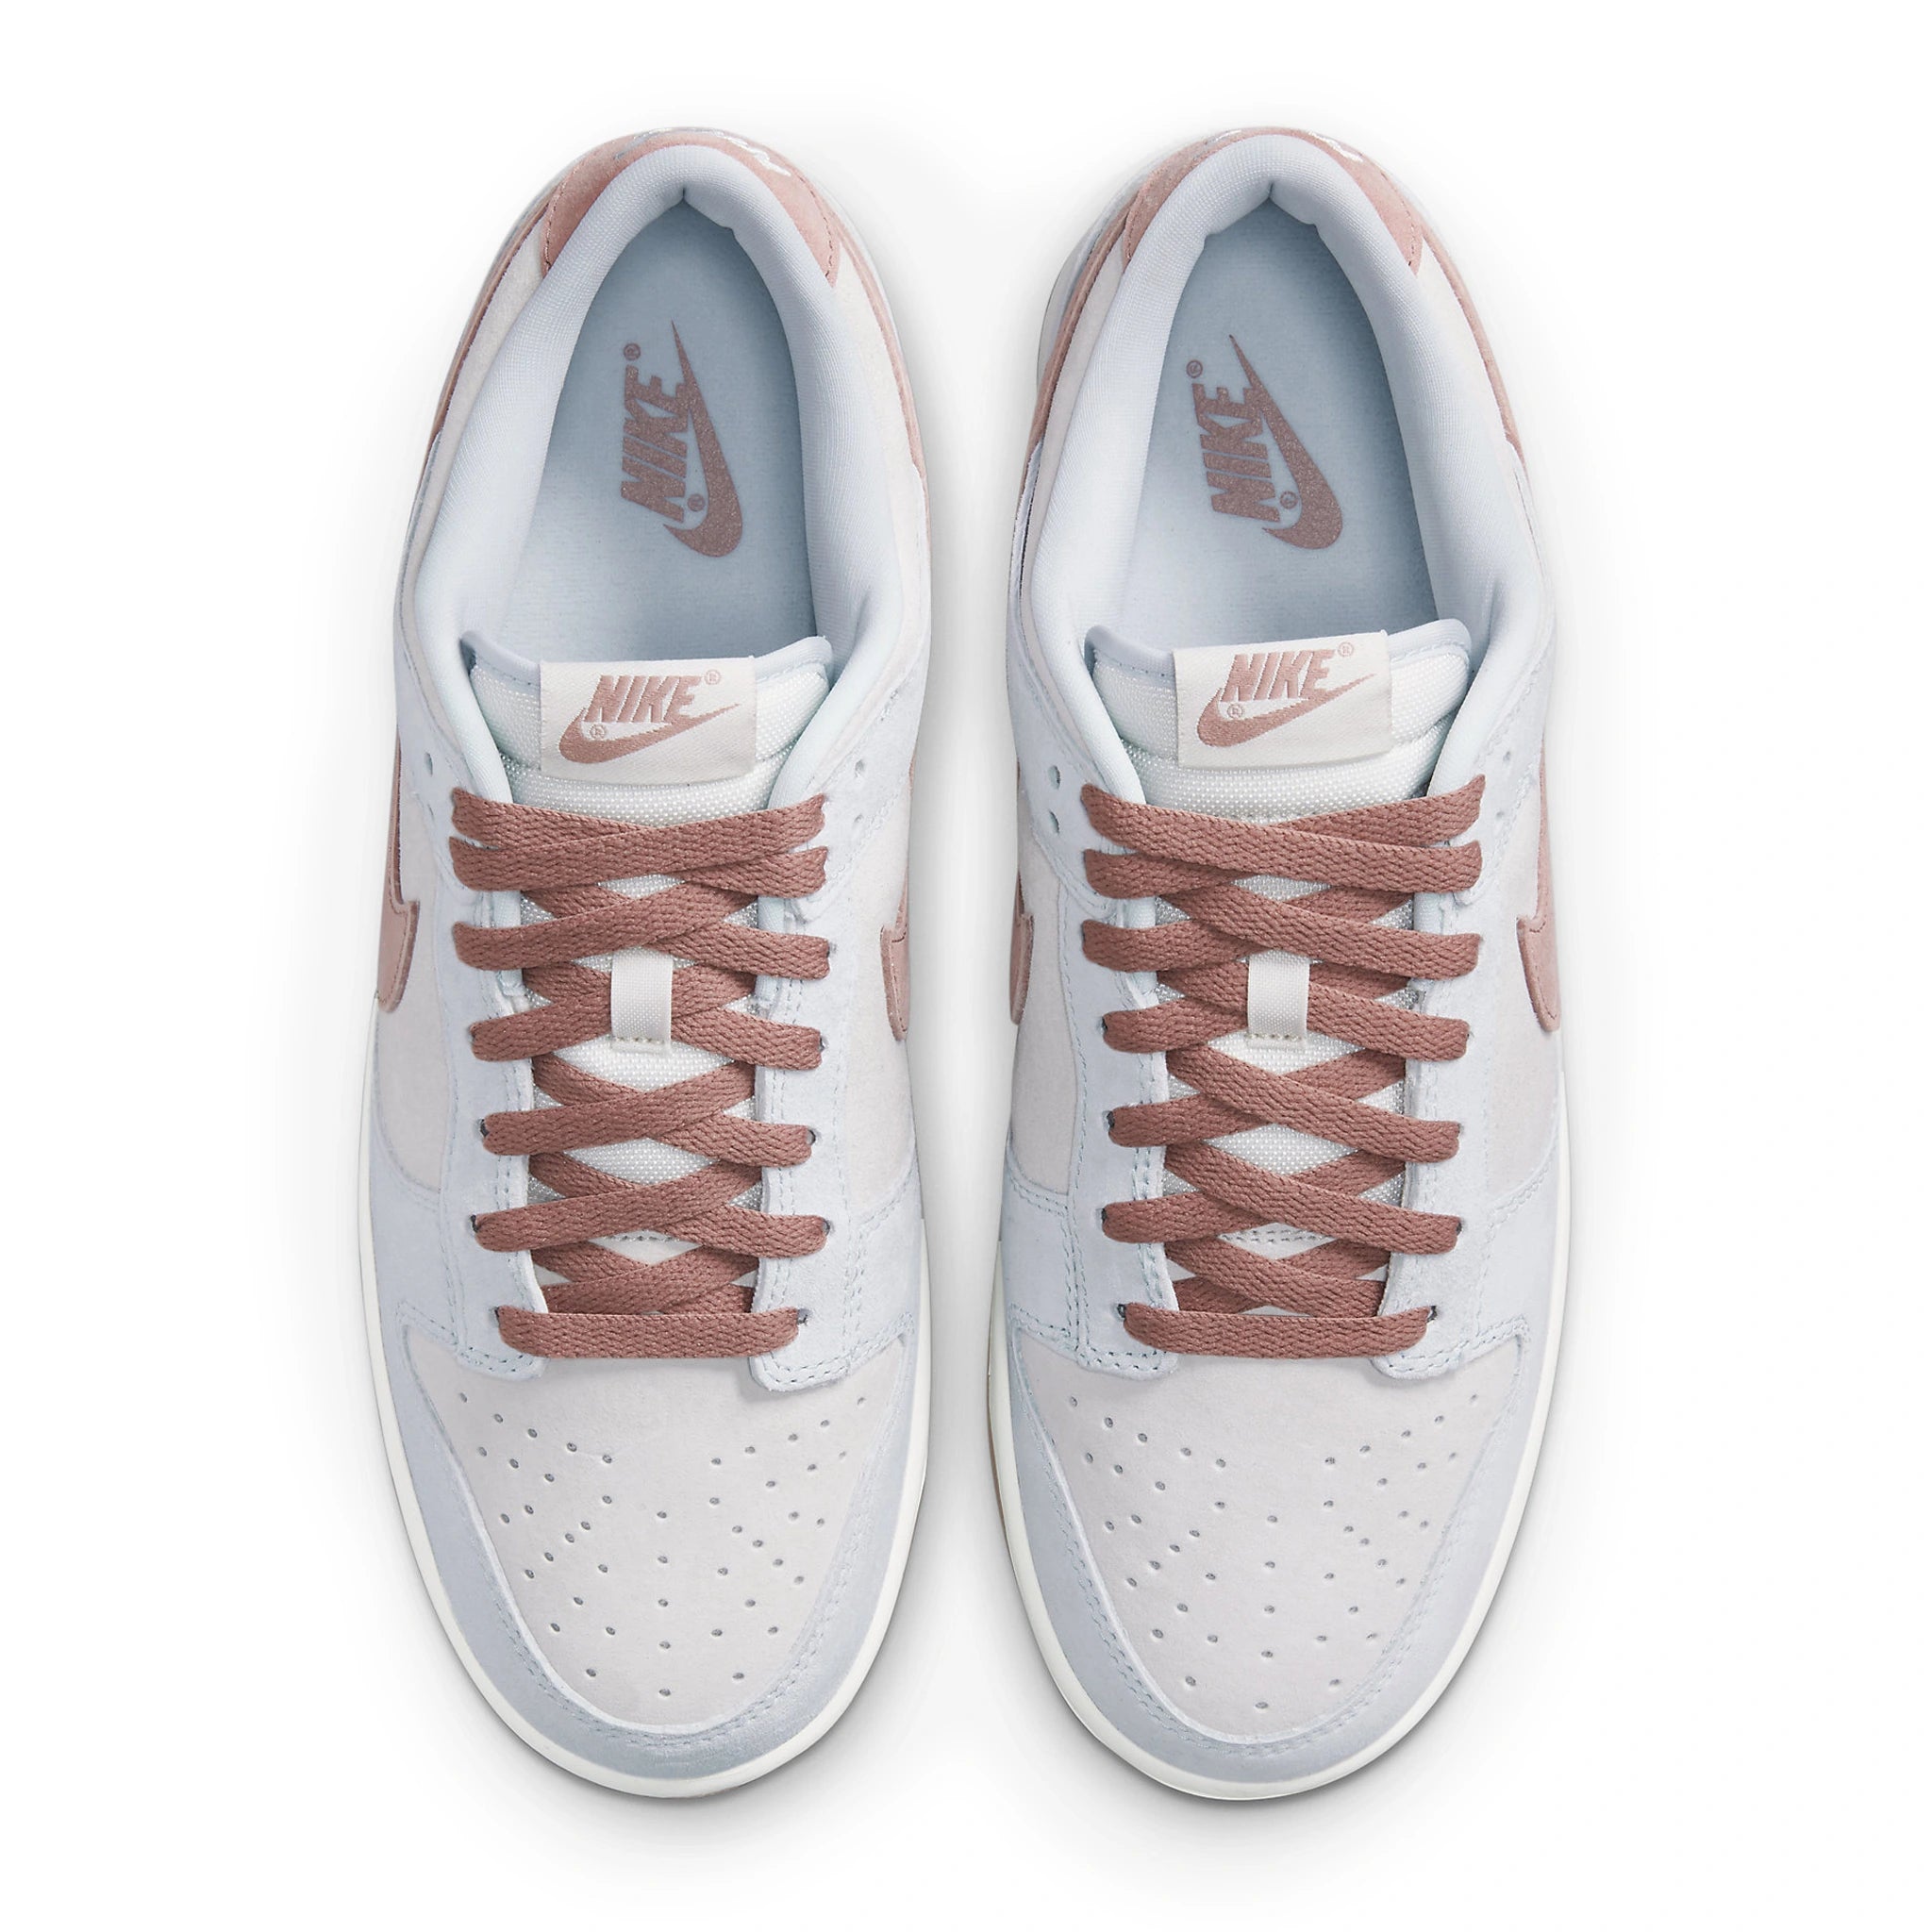 Top view of Nike Dunk Low Fossil Rose DH7577-001